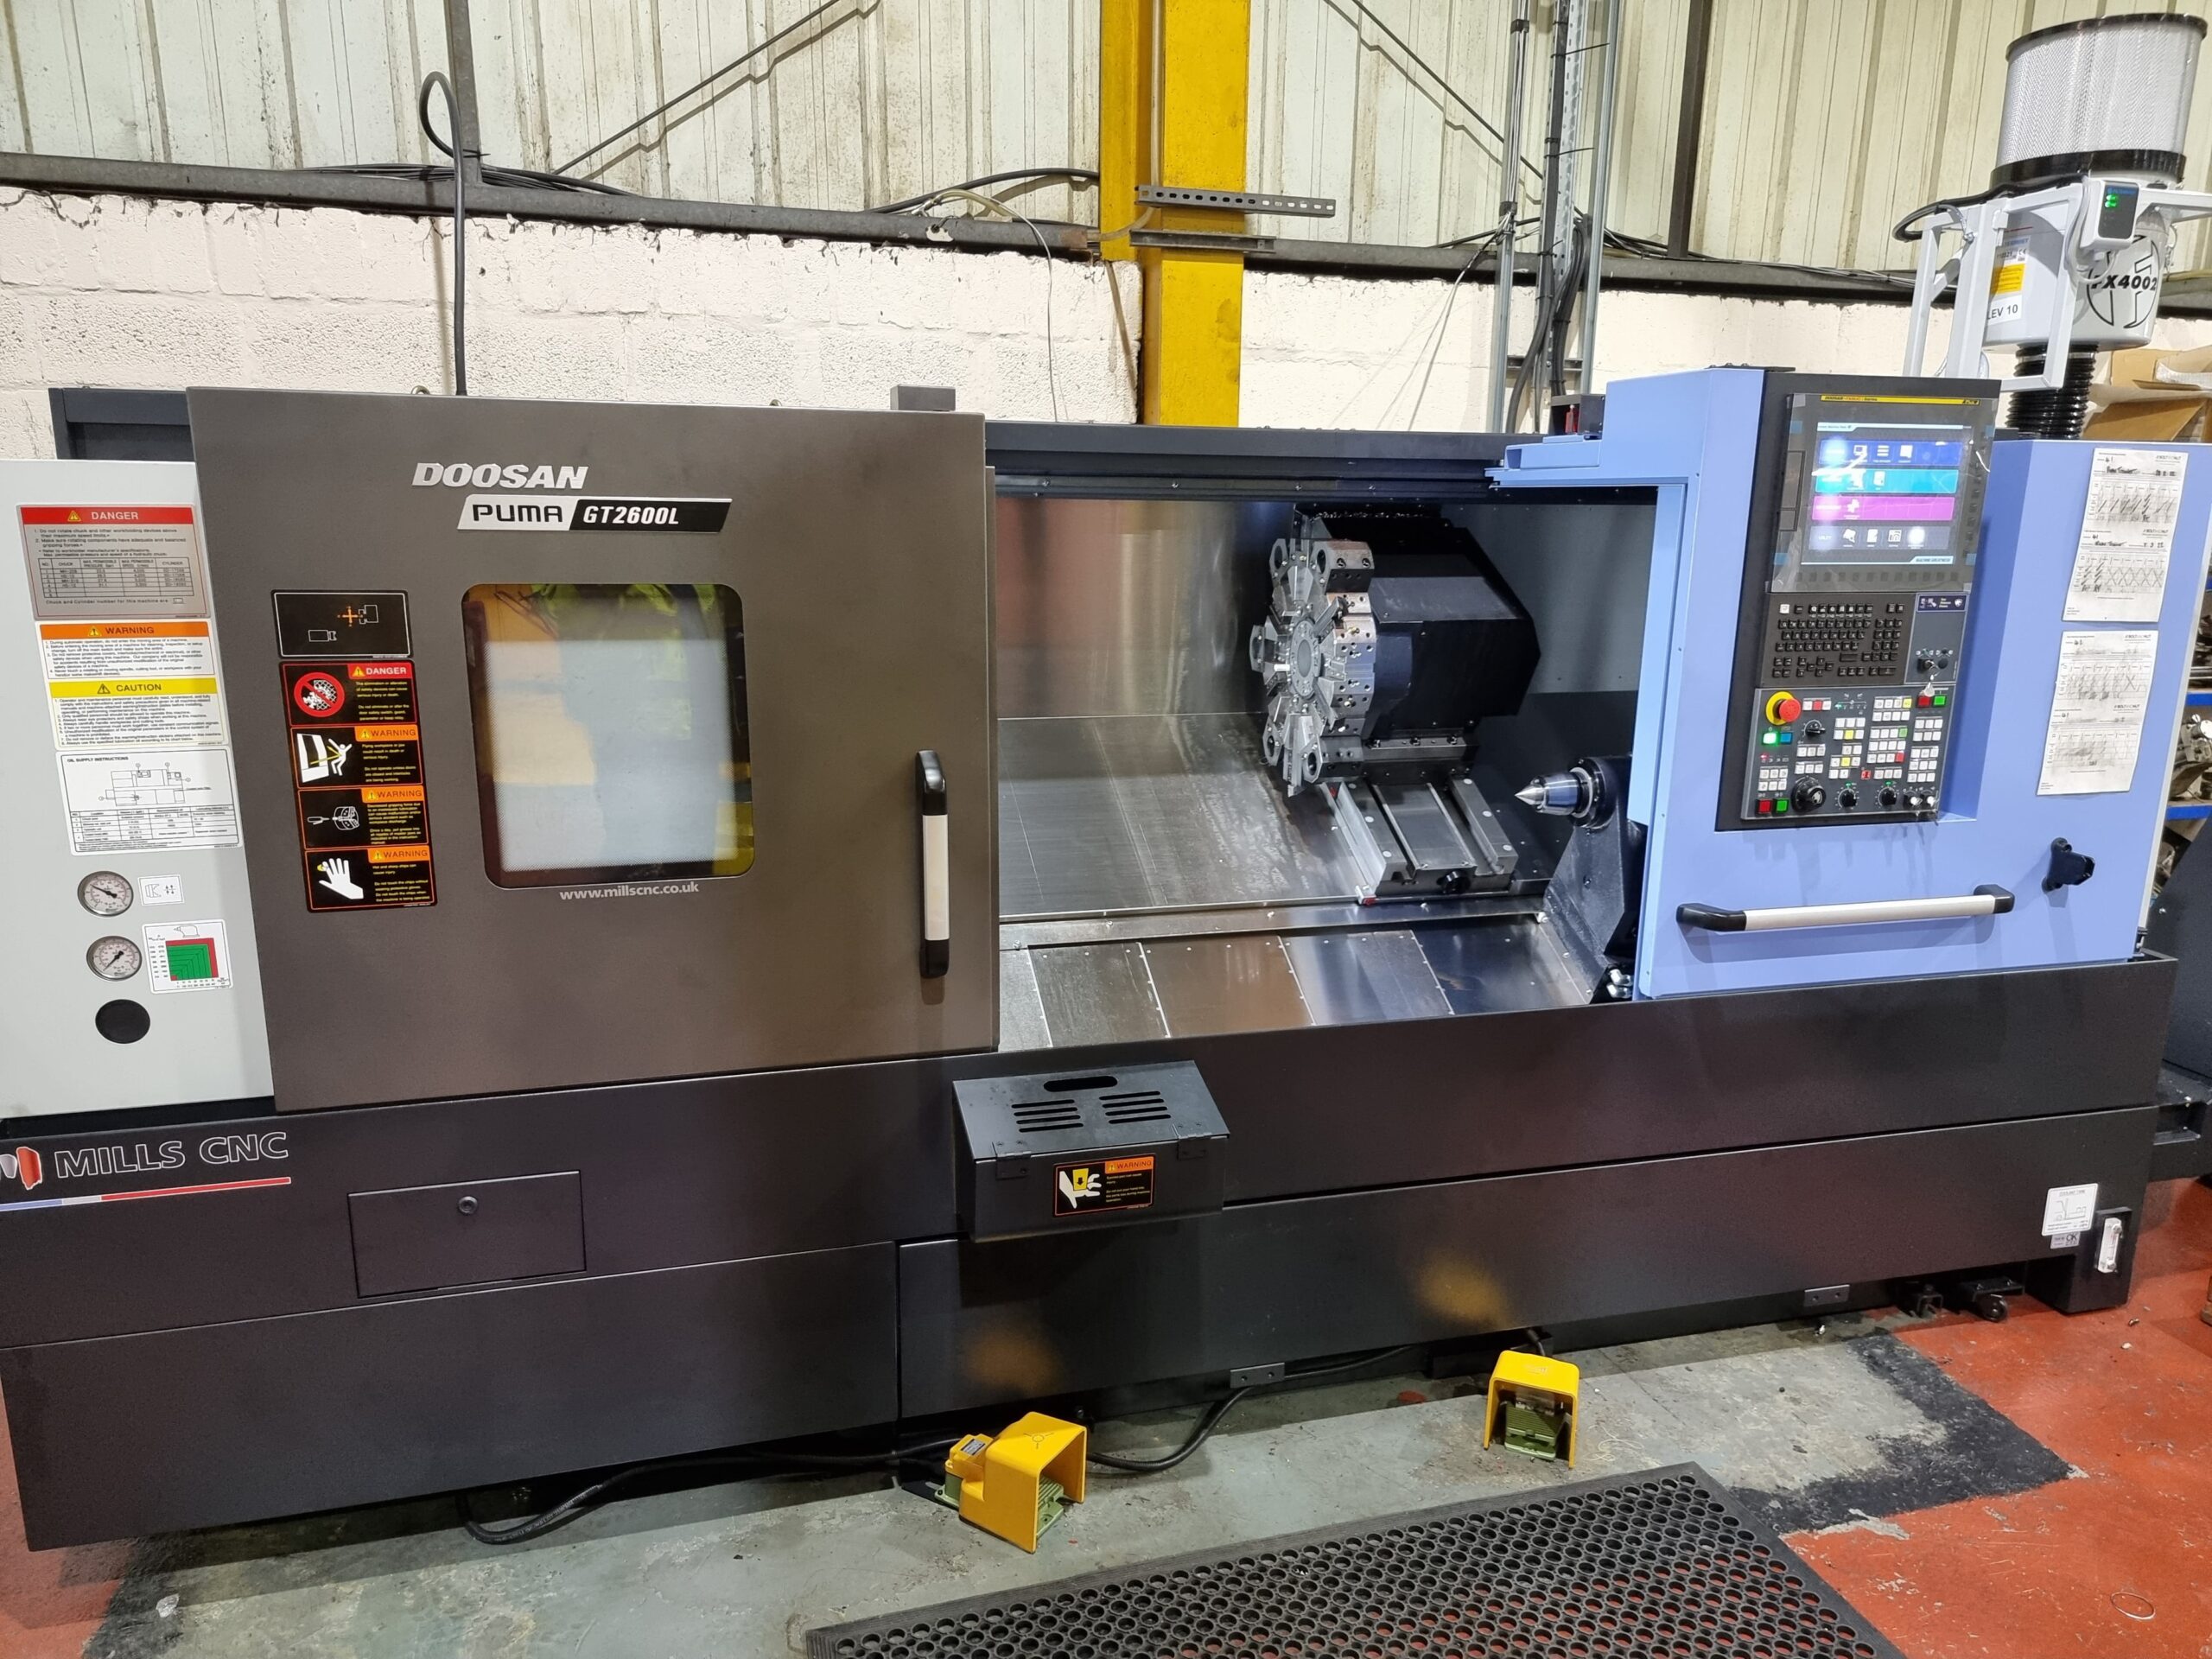 We’re STILL at the cutting edge with a pair of new CNC lathes